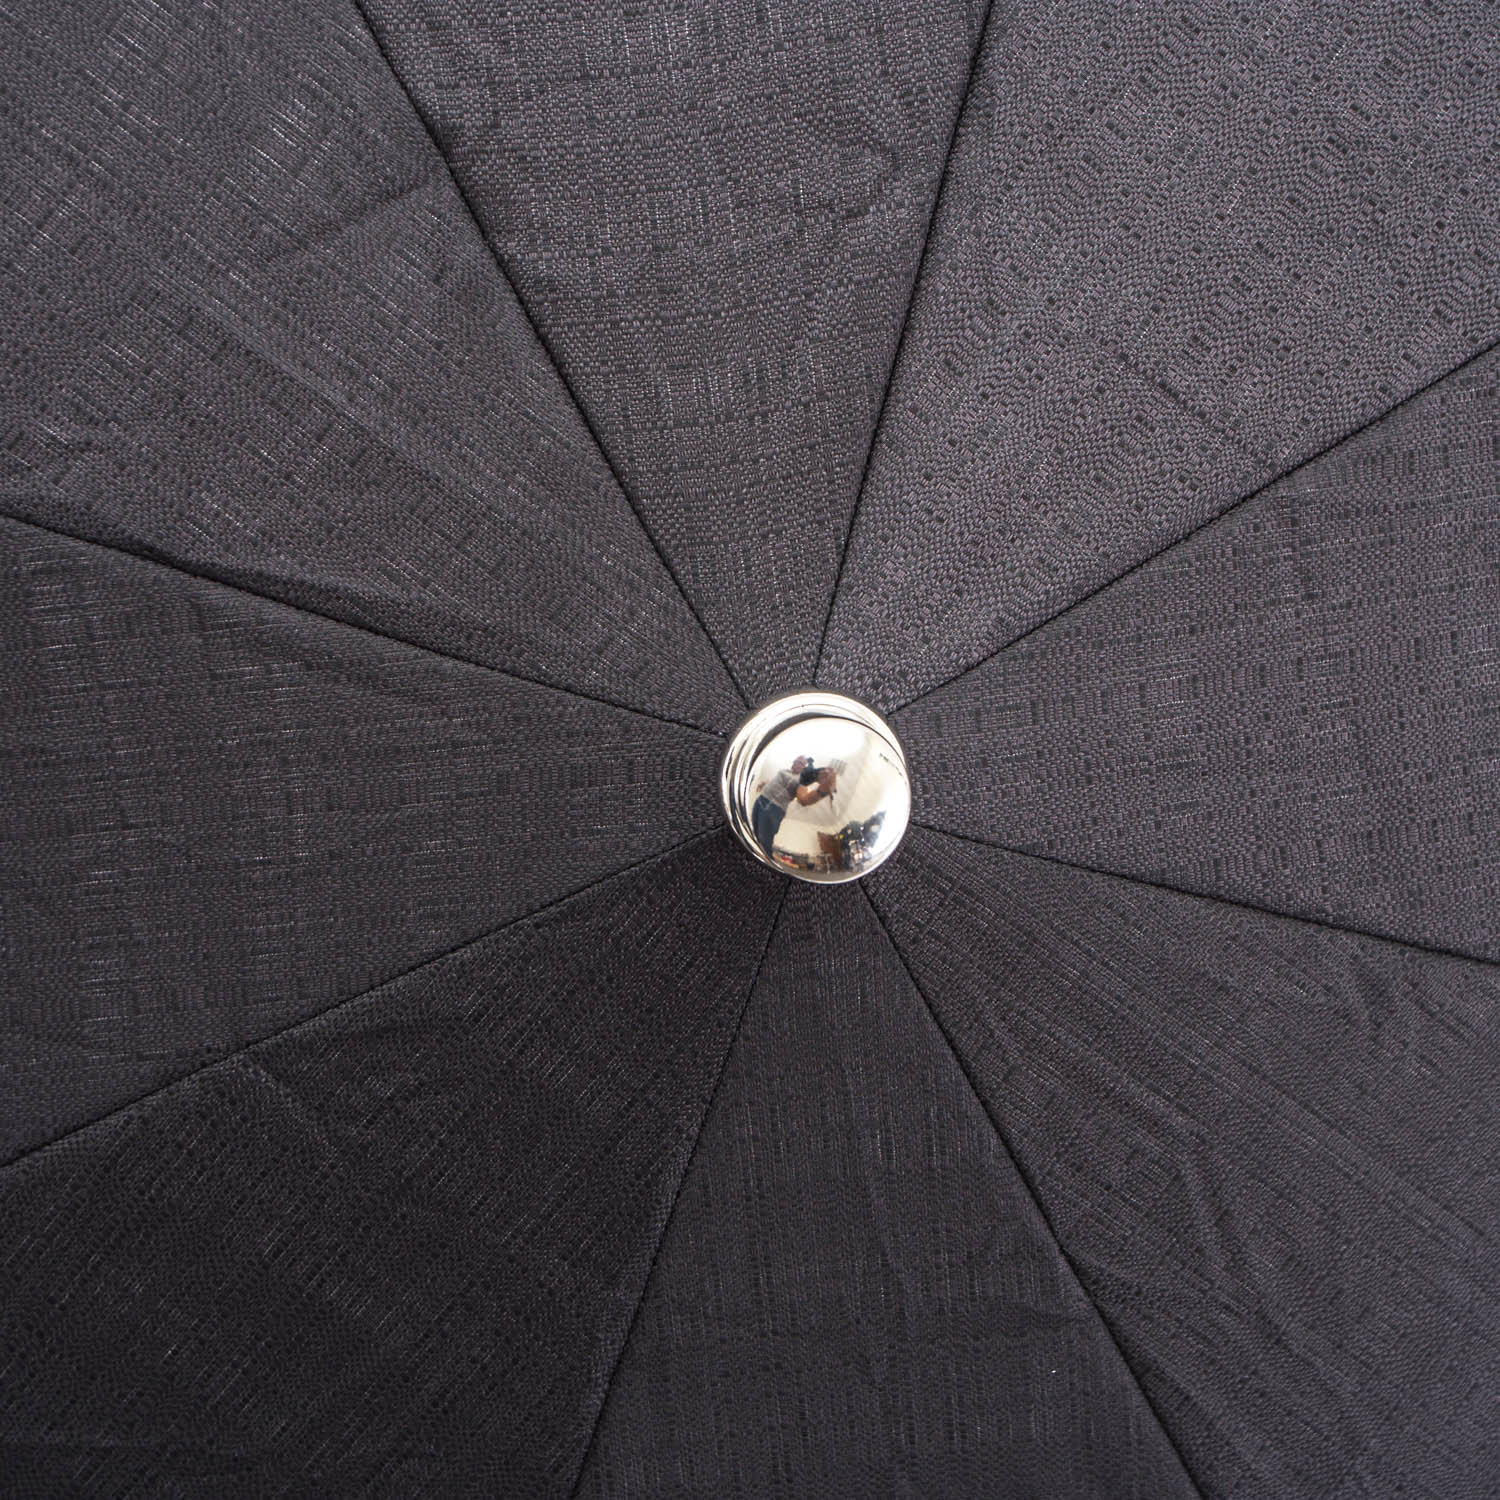 A Imperial Black Travel Umbrella with Woven Leather Handle by KirbyAllison.com with Italian craftsmanship.